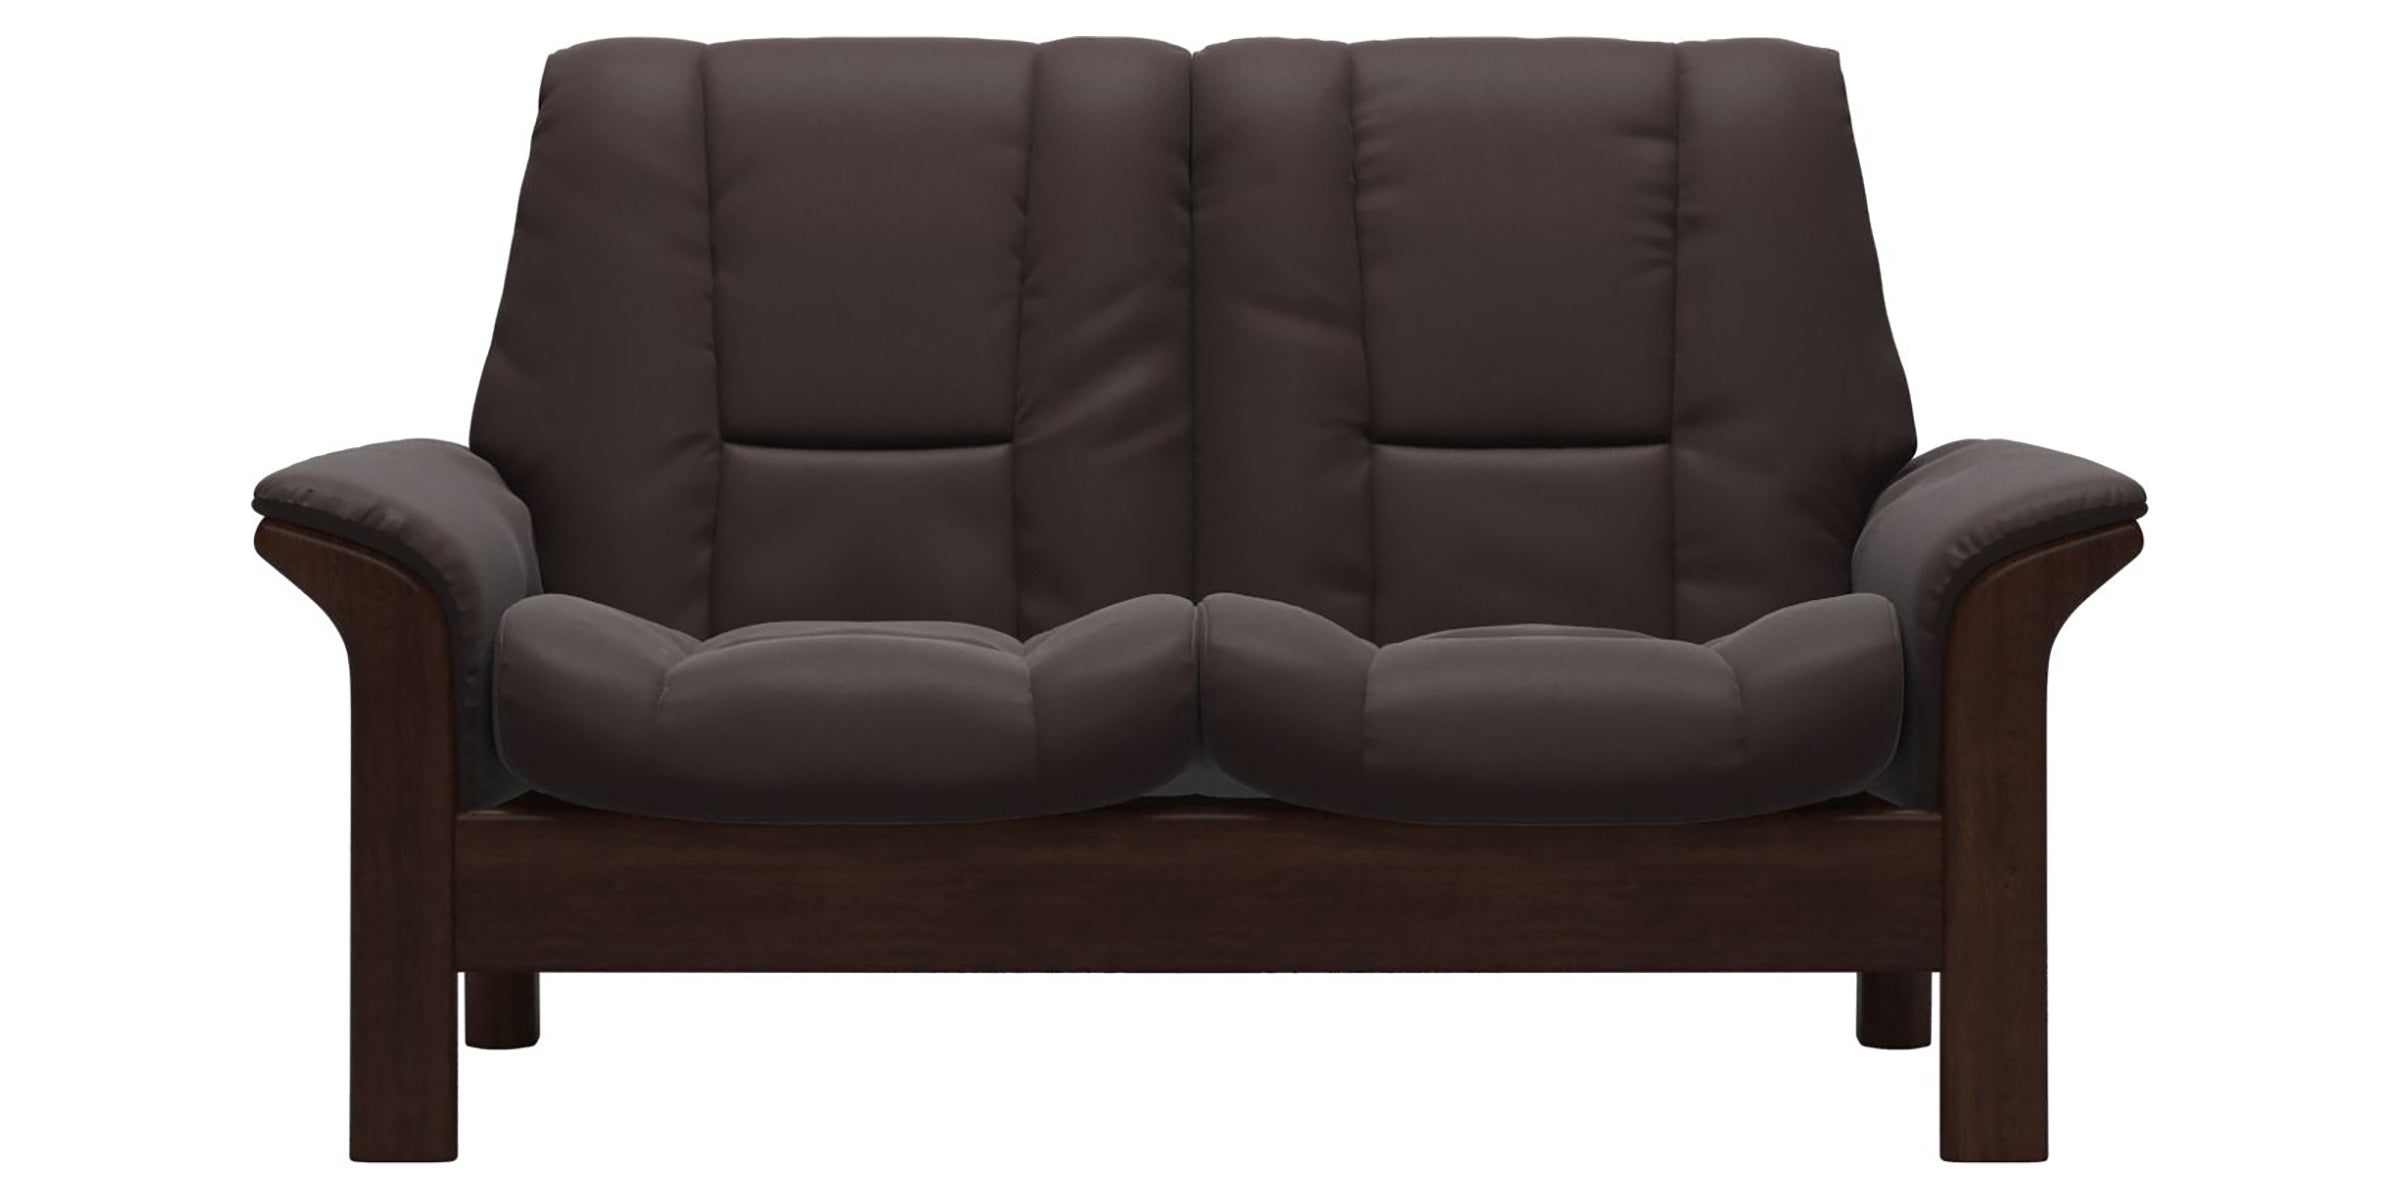 Paloma Leather Chocolate and Brown Base | Stressless Windsor 2-Seater Low Back Sofa | Valley Ridge Furniture